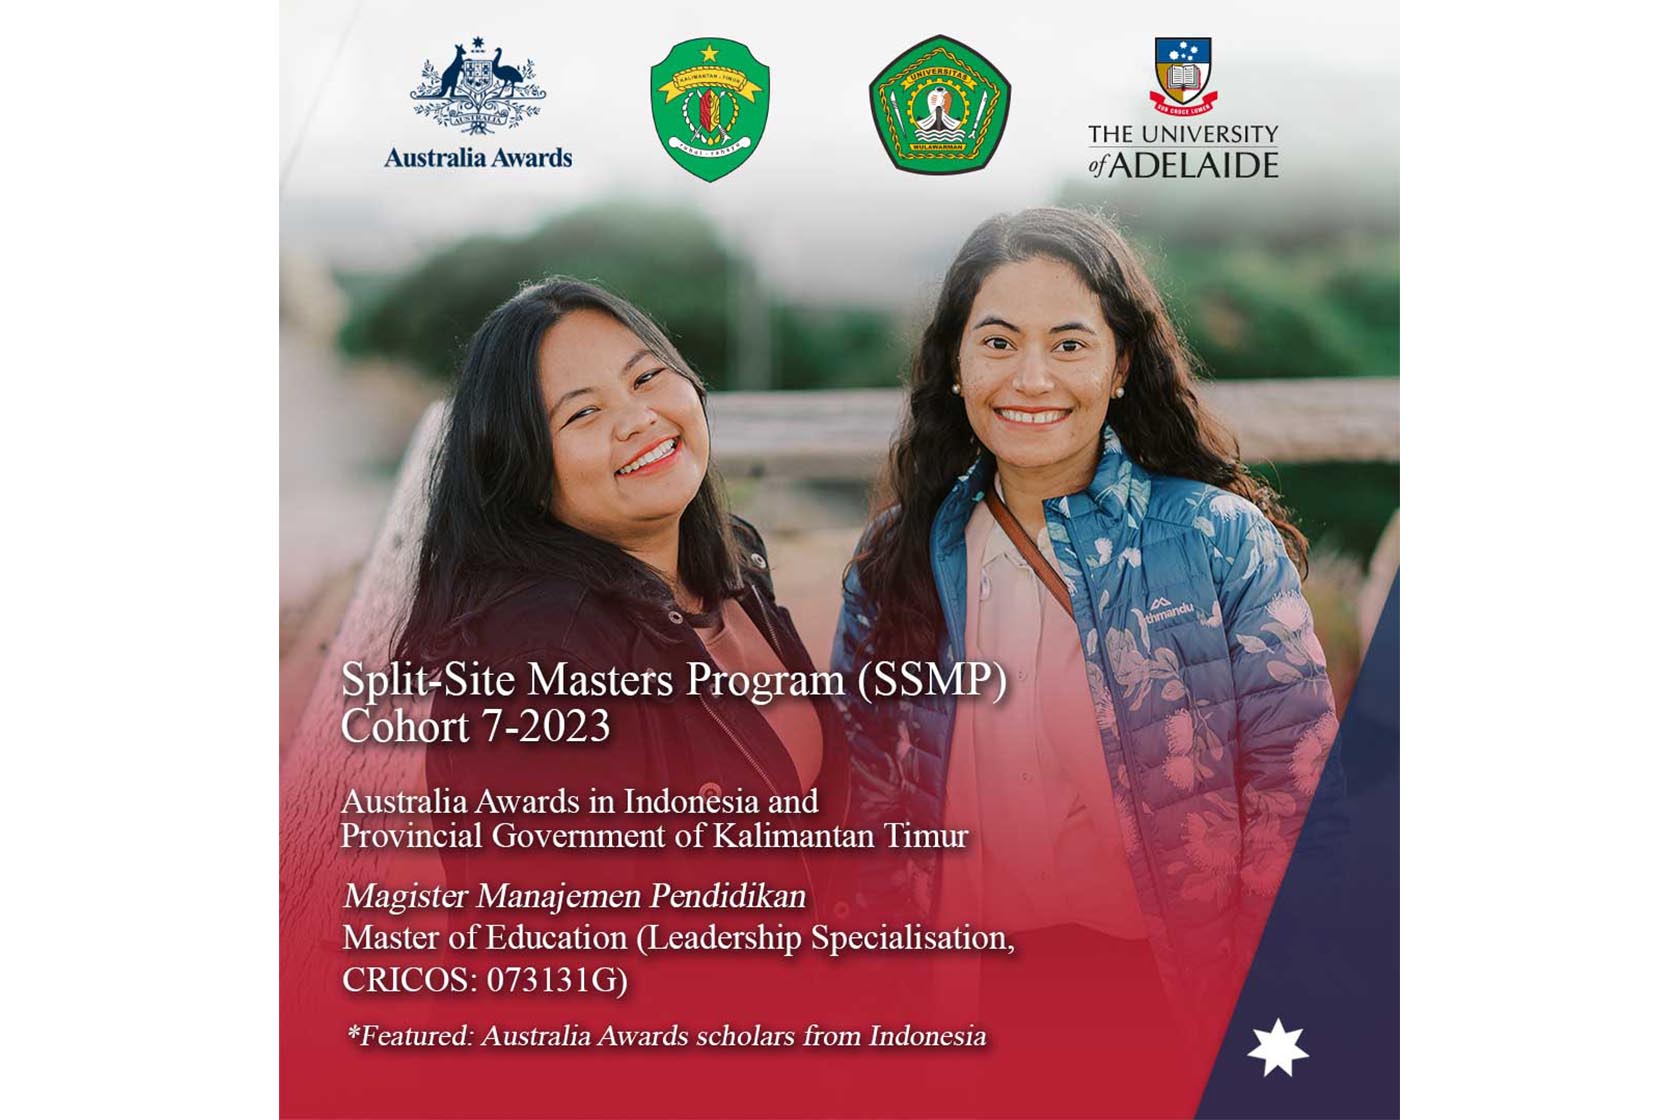 Apply Now for the Split-Site Masters Scholarship Program for the Citizens of Kalimantan Timur